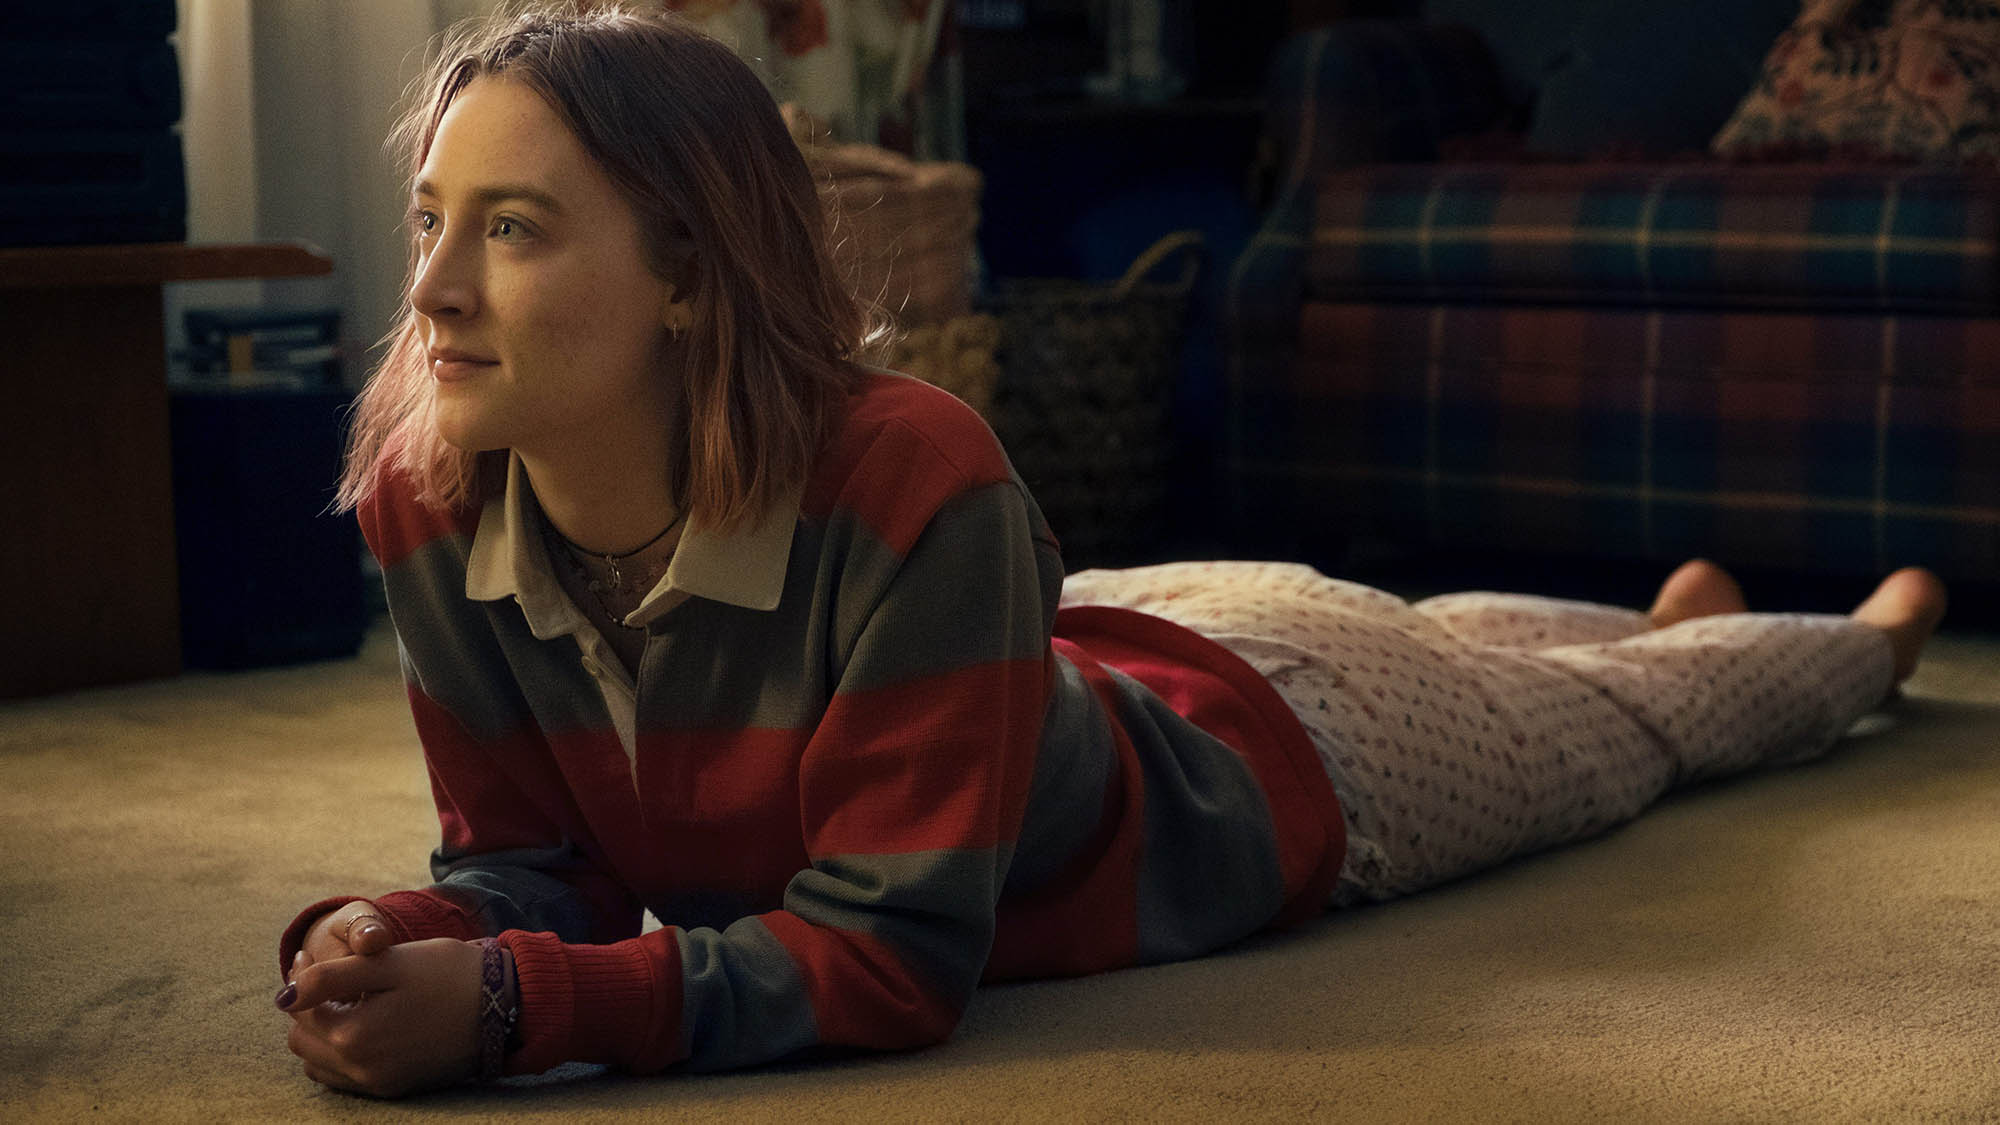 'Lady Bird' has been and gone, leaving a Greta Gerwig-shaped hole in our lives. But fret not! In celebration of this indie-flick feat, we’ve carefully selected a series of films that should quench that 'Lady Bird' thirst of yours.